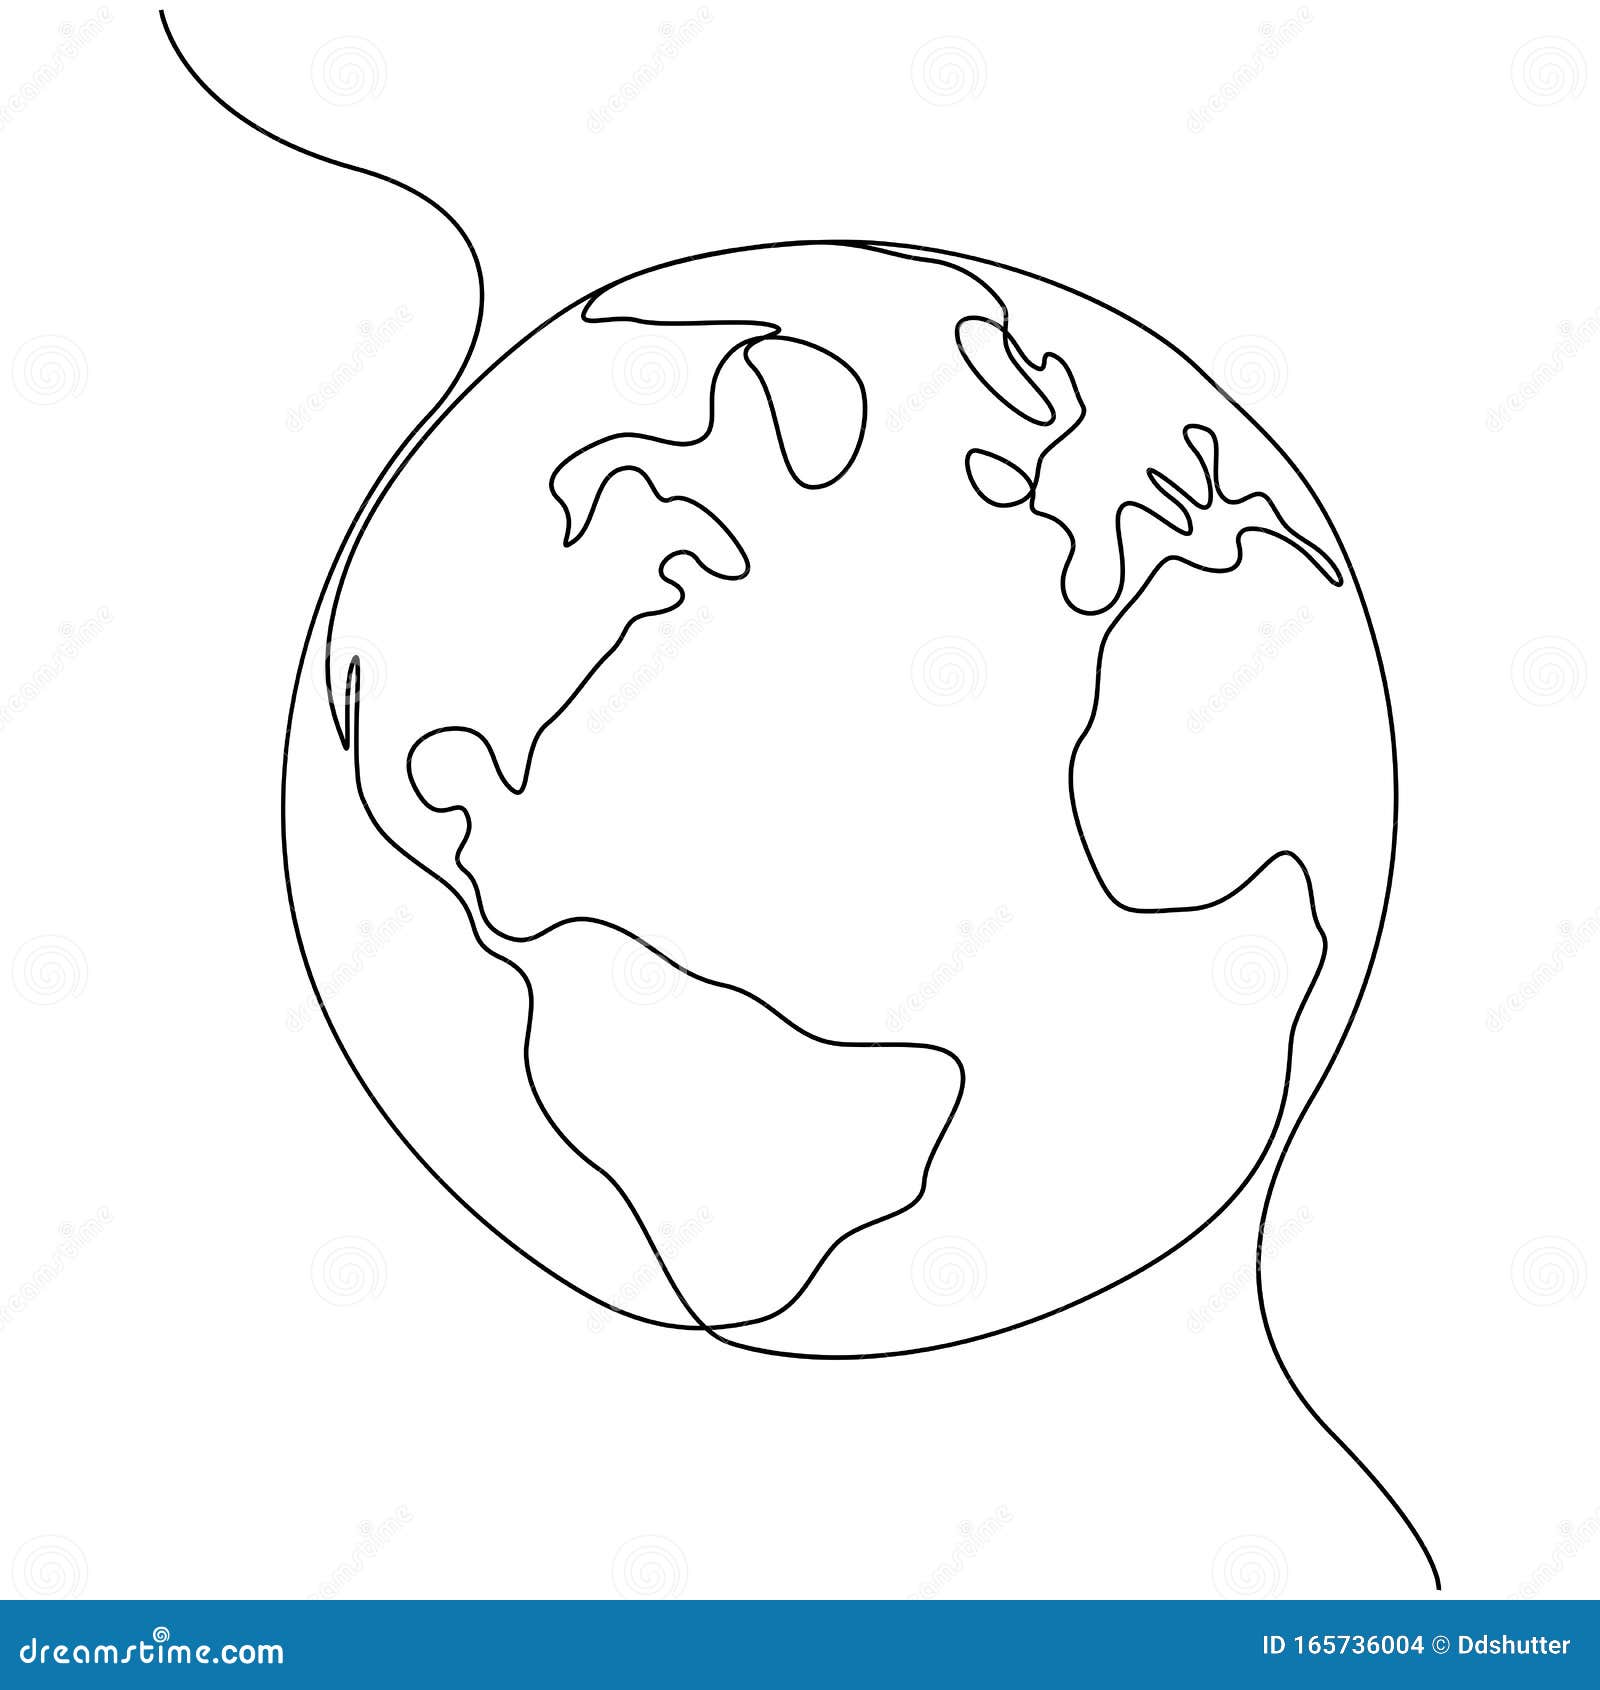 One Line Style World Minimal Style Globe Earth Drawing Simple Modern Minimaistic Style Vector Stock Vector Illustration Of Conceptual America